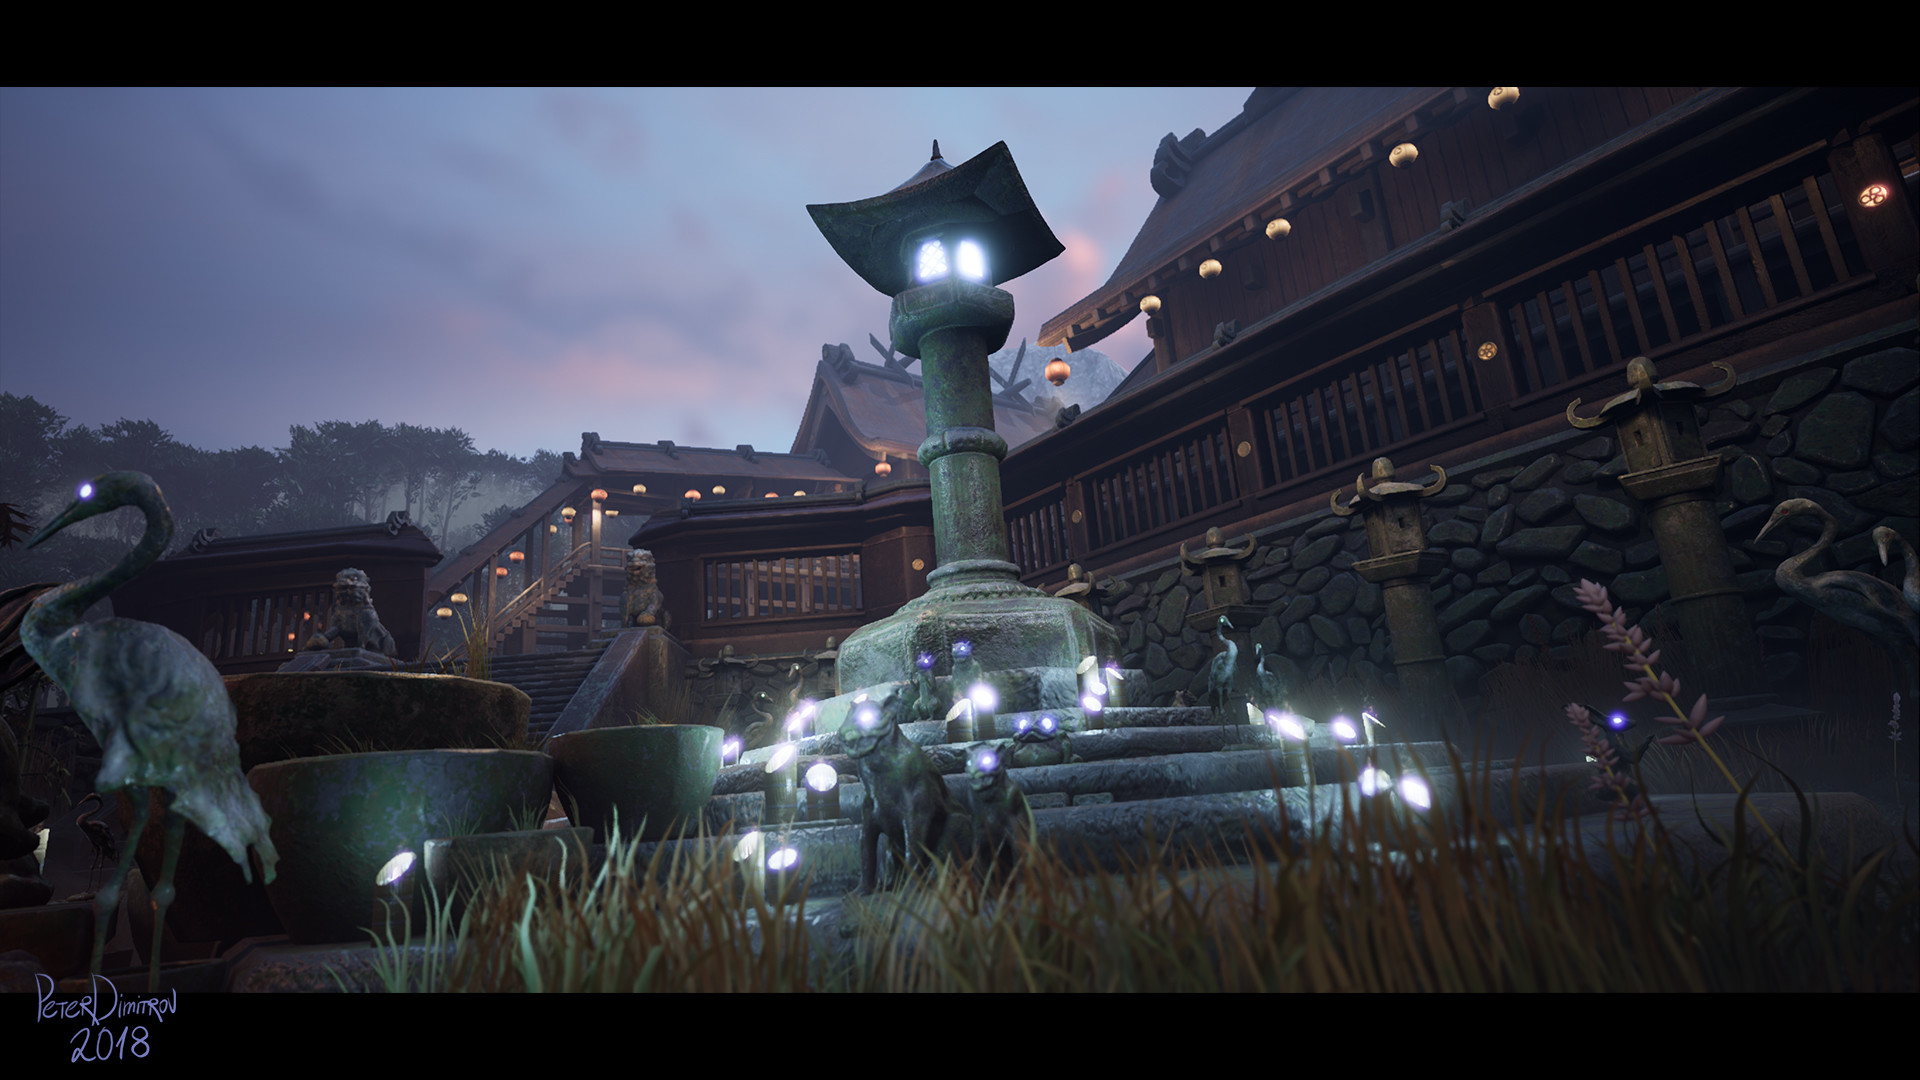 Low angle screenshot, from the ground. Shows the circular shrine with the bamboo candles and the stone lantern. All of the lights are recolored from their ordinary orange, to a cold, magical blue. The animal statues now have their eyes light up and those are also in aggressive, white blue colors.